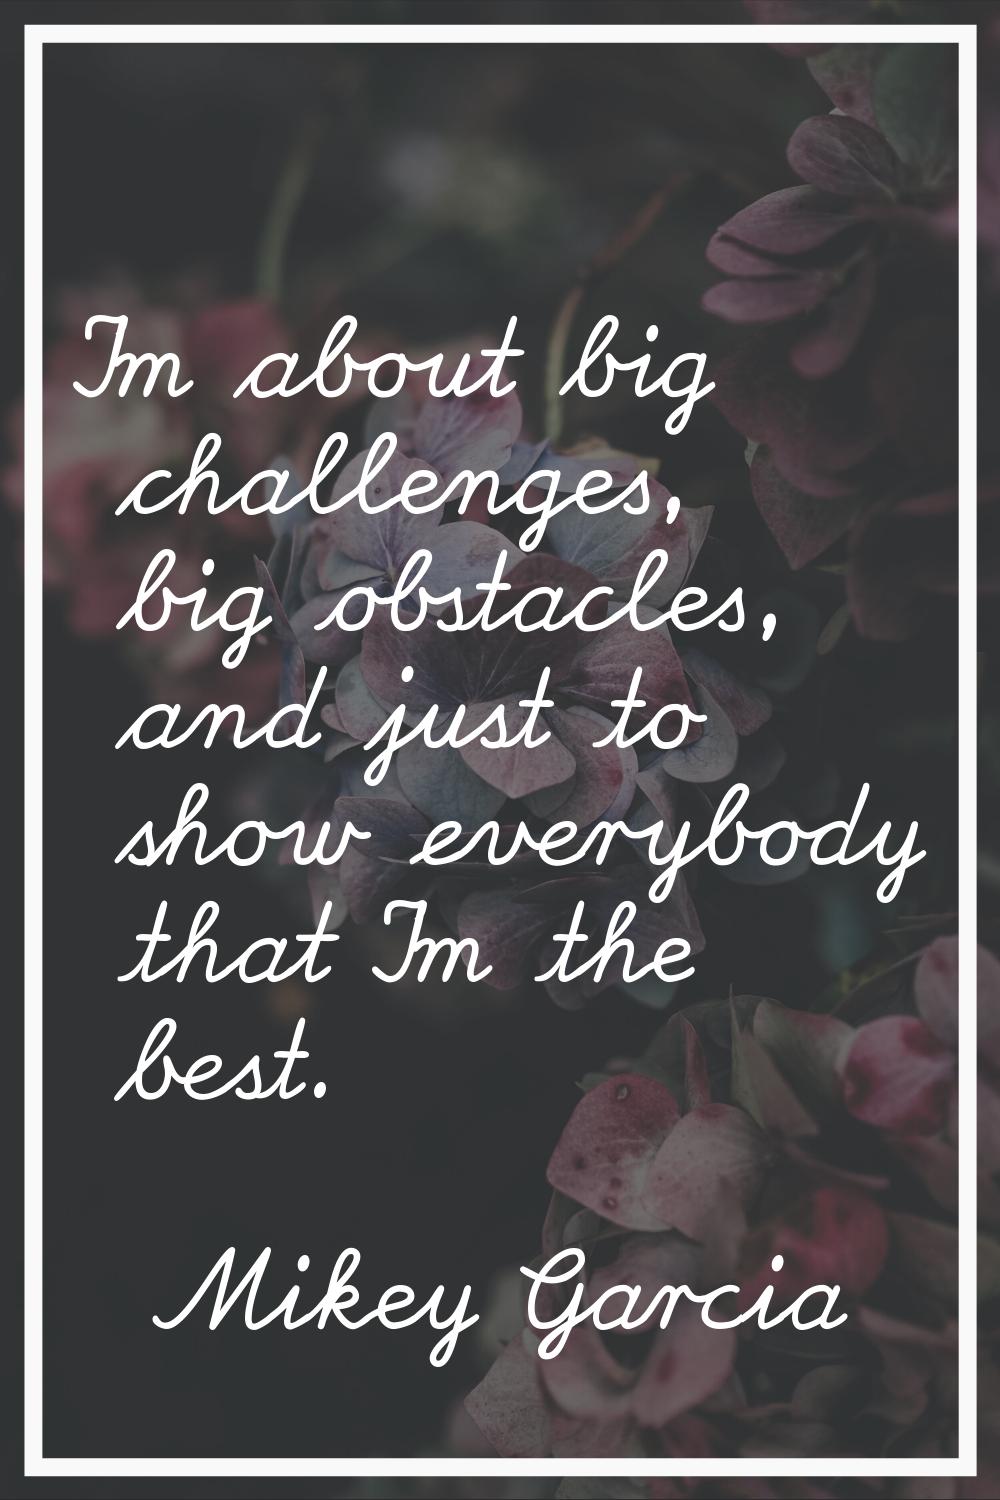 I'm about big challenges, big obstacles, and just to show everybody that I'm the best.